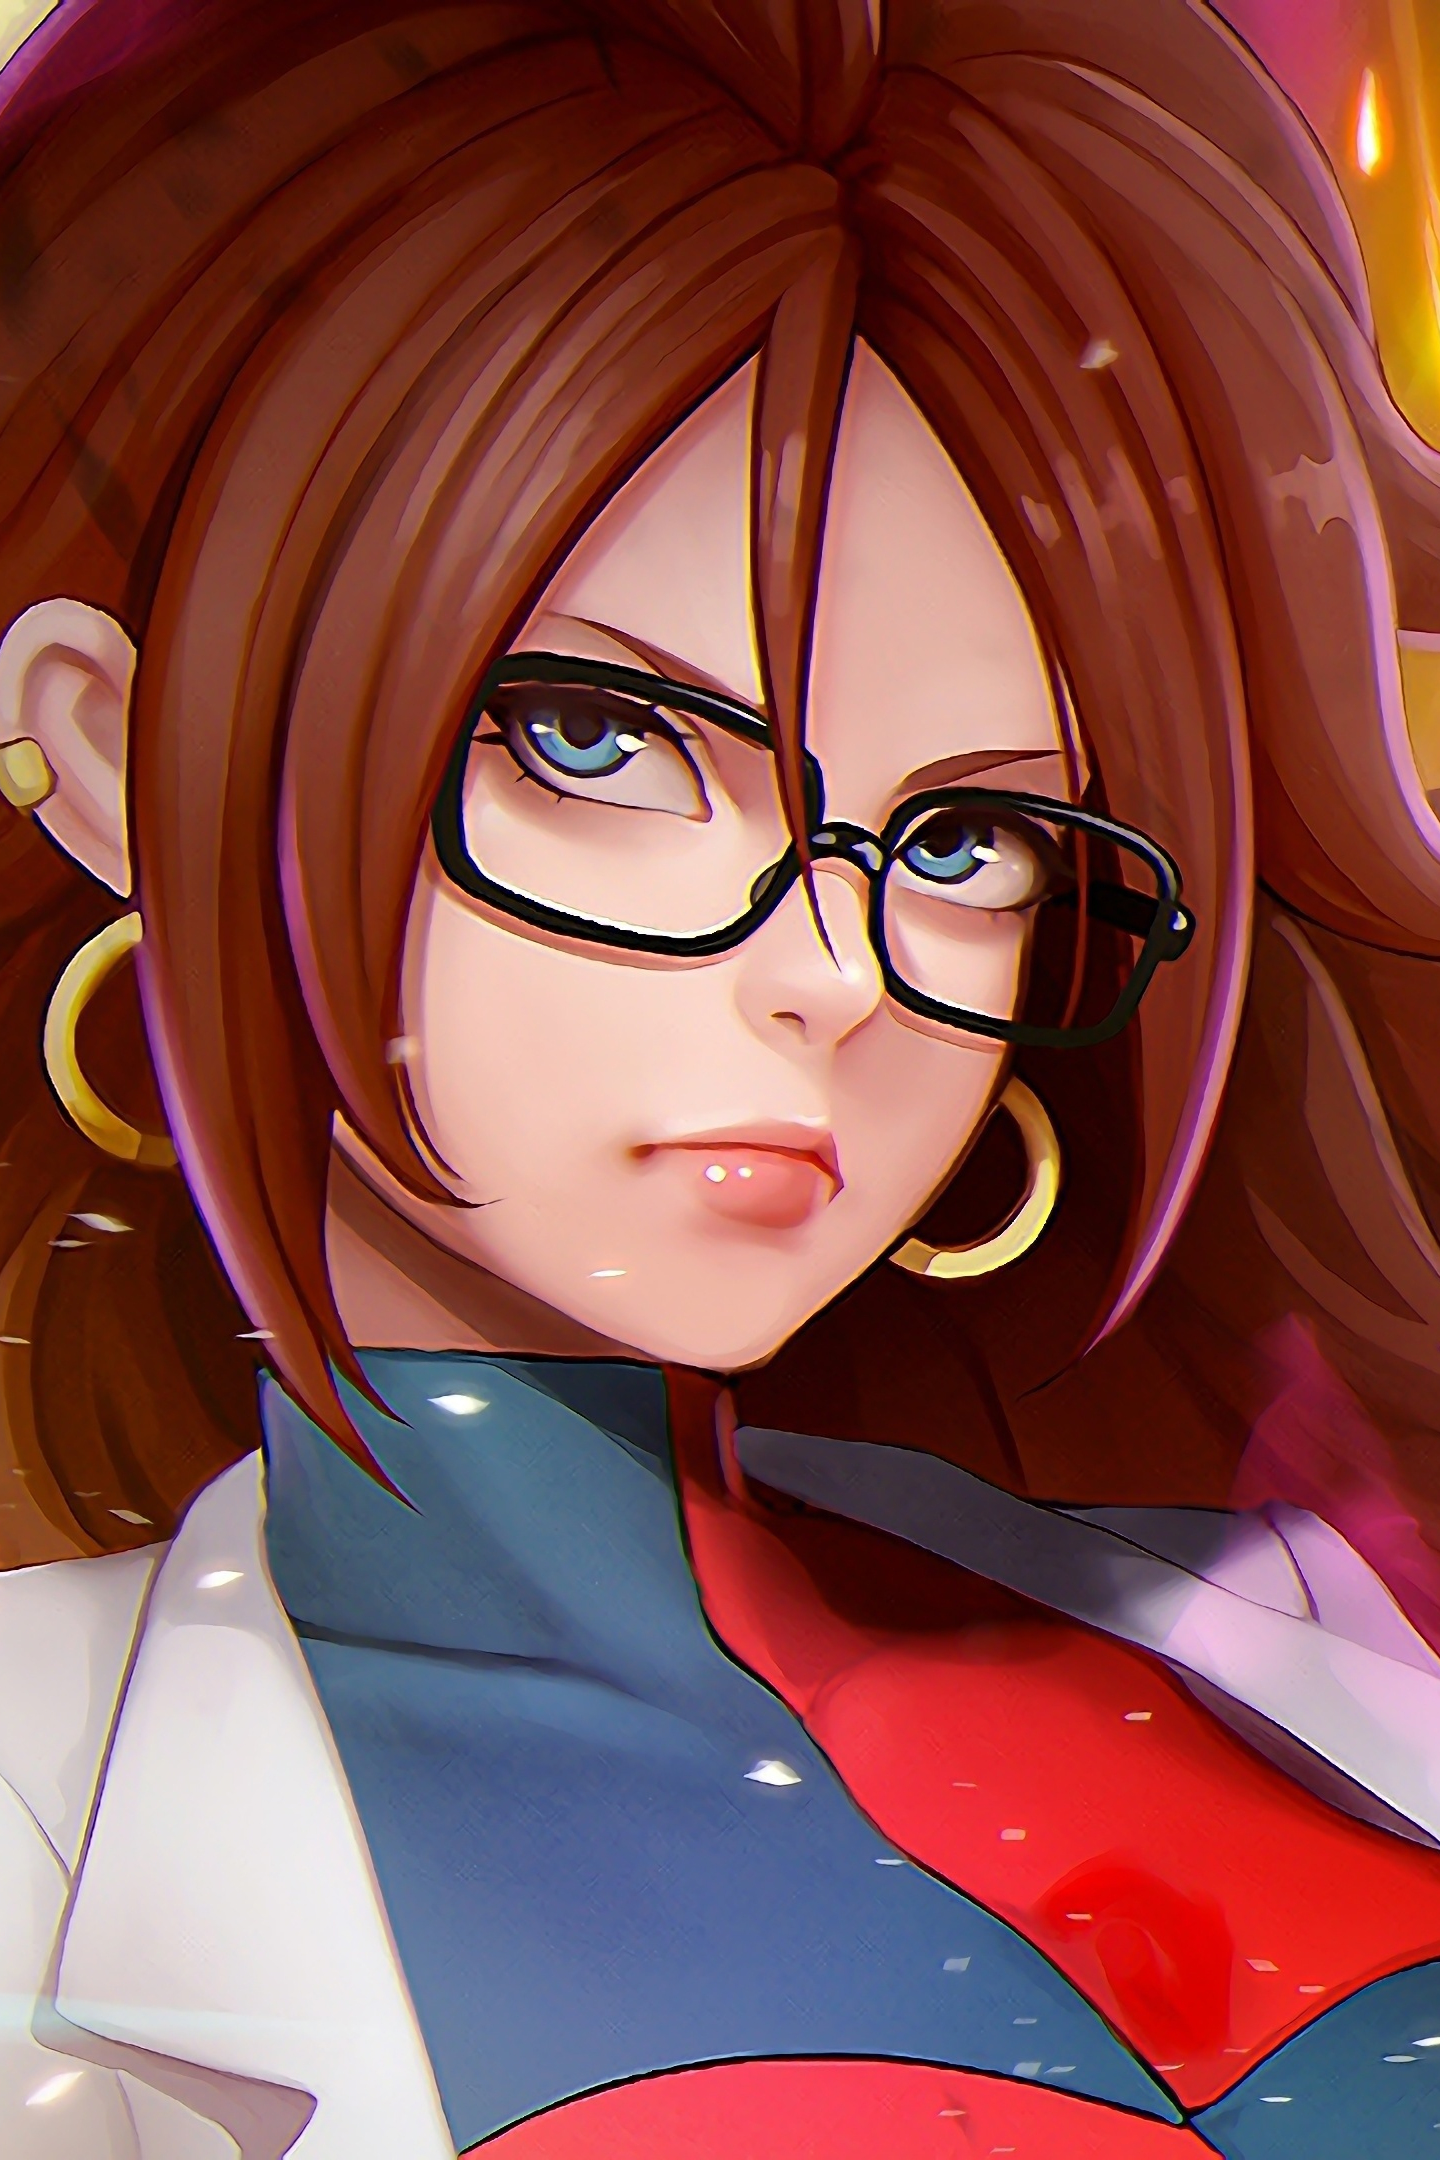 Download Wallpaper 1440x2960 Hot Dragon Ball Fighterz Android 21 Glasses Samsung Galaxy S8 Samsung Galaxy S8 Plus 1440x2960 Hd Background 4678